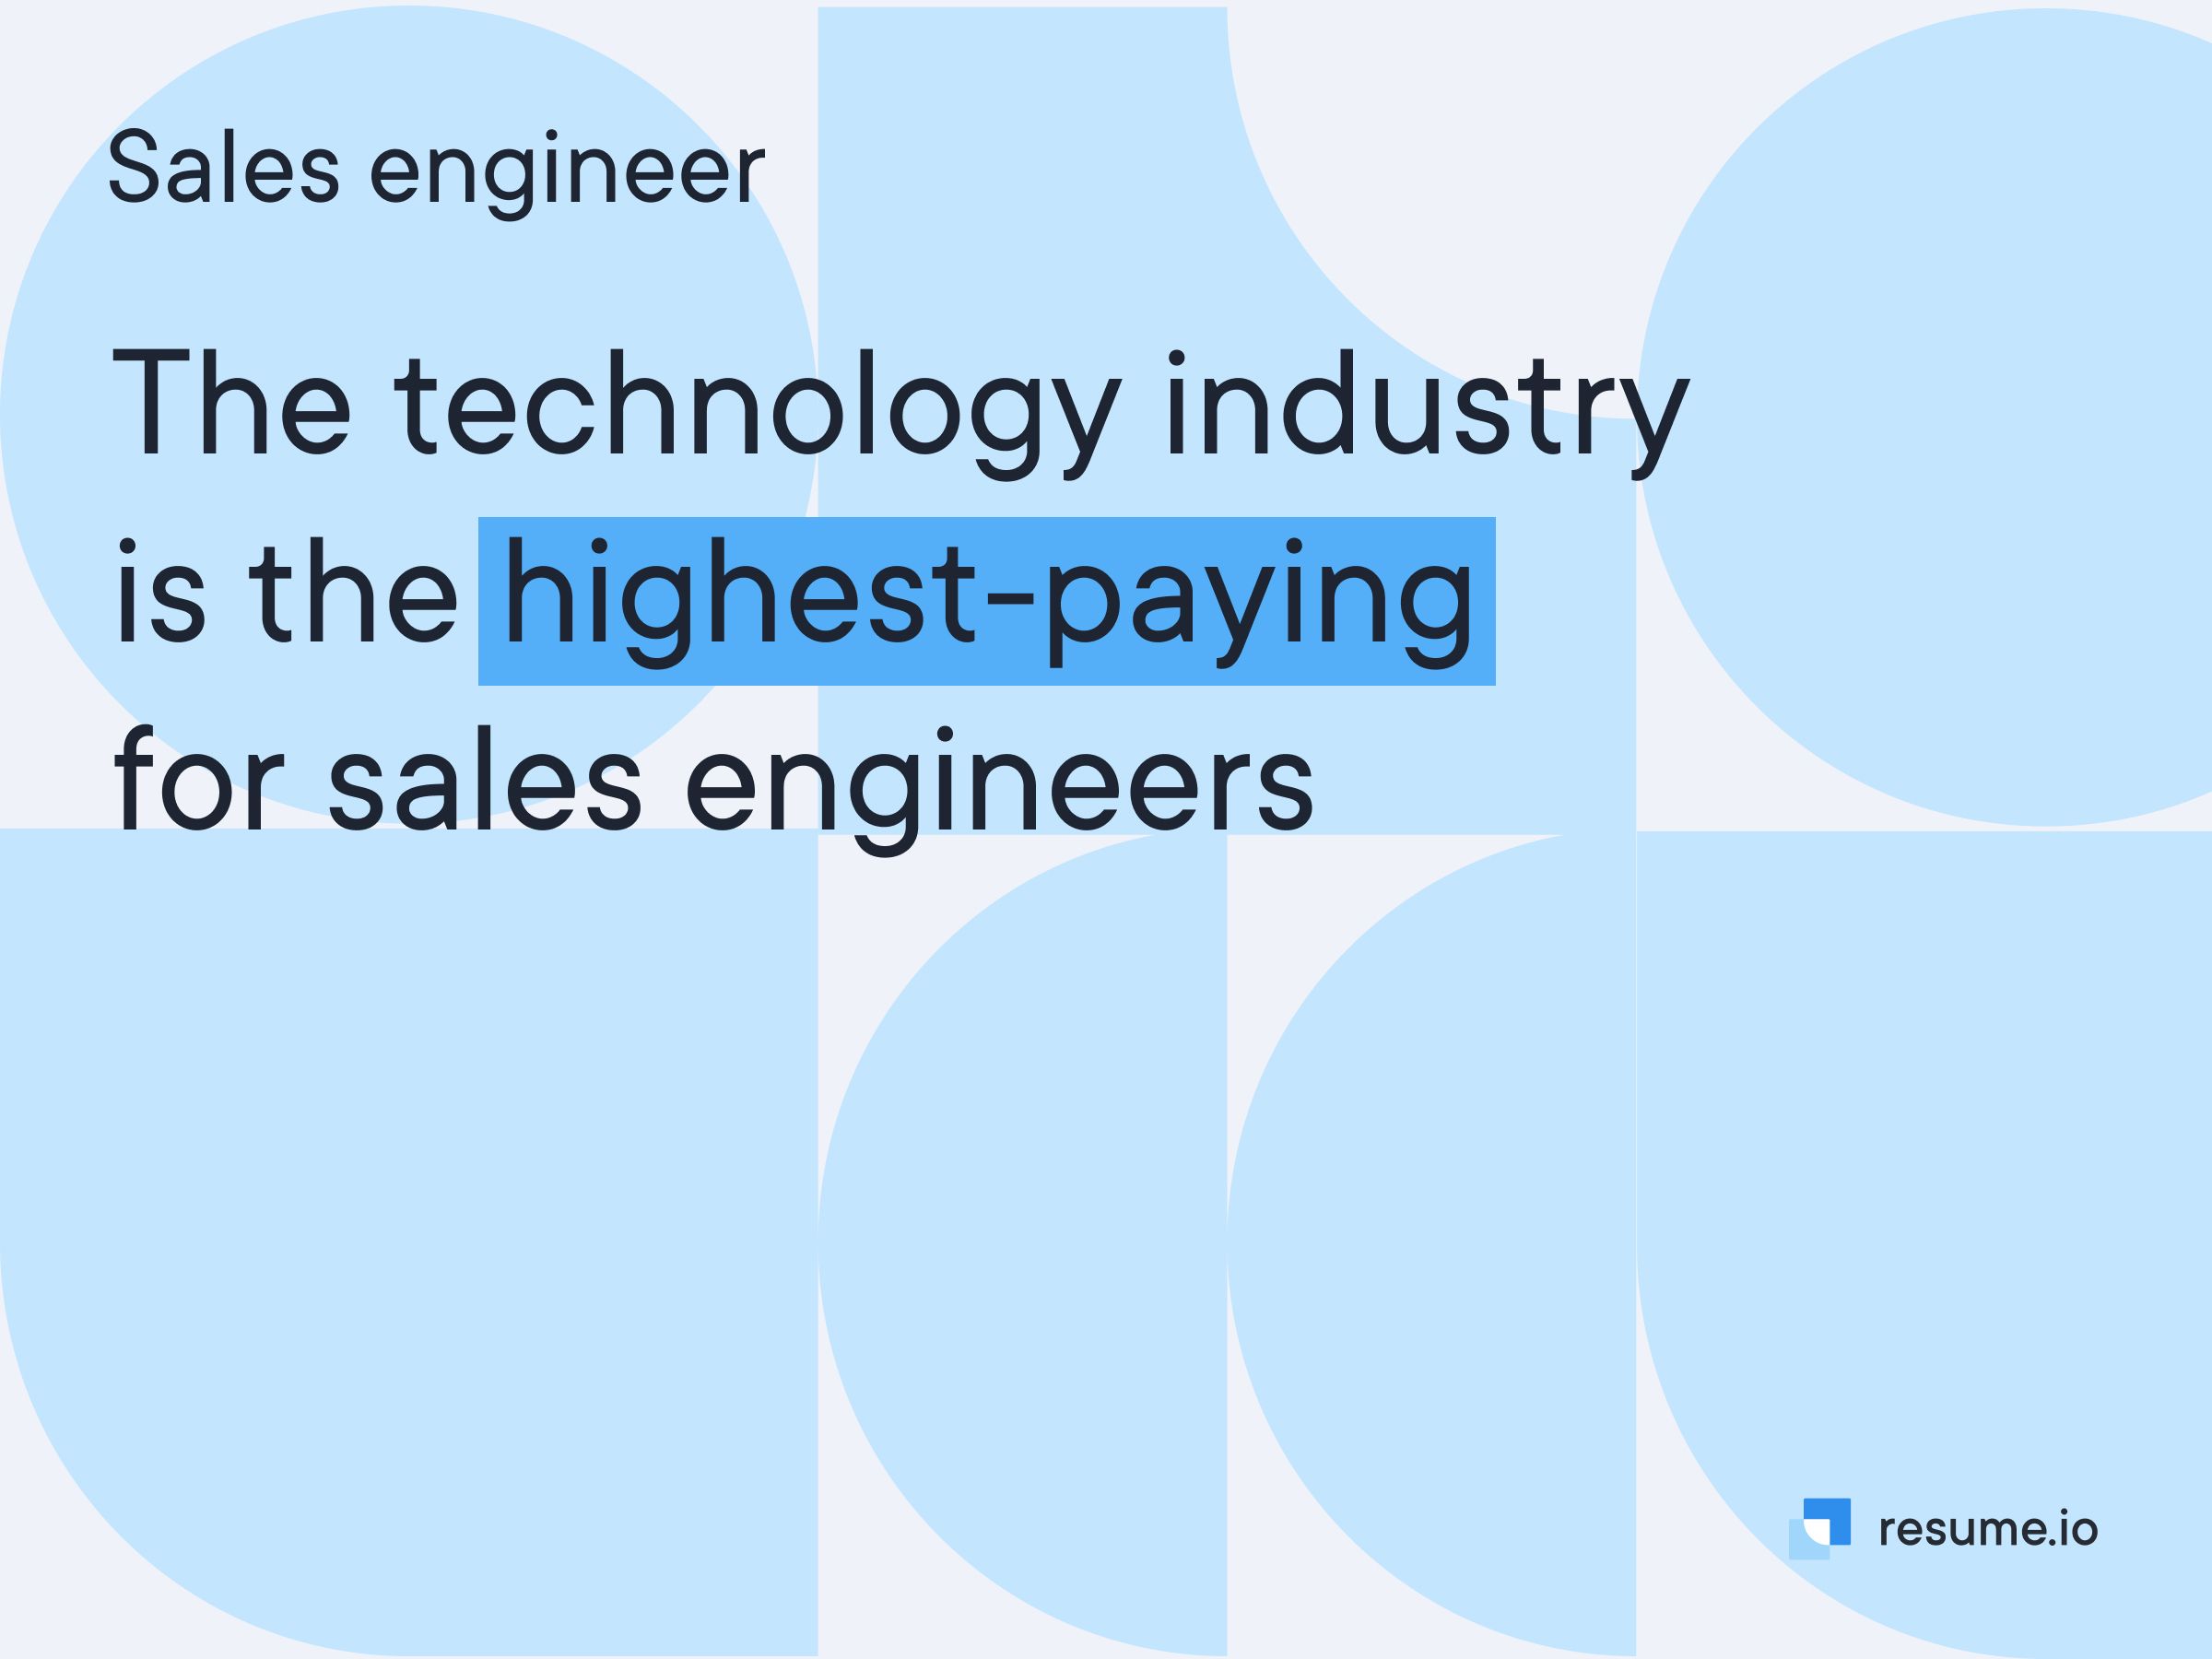 Technology industry is the highest-paying for sales engineers